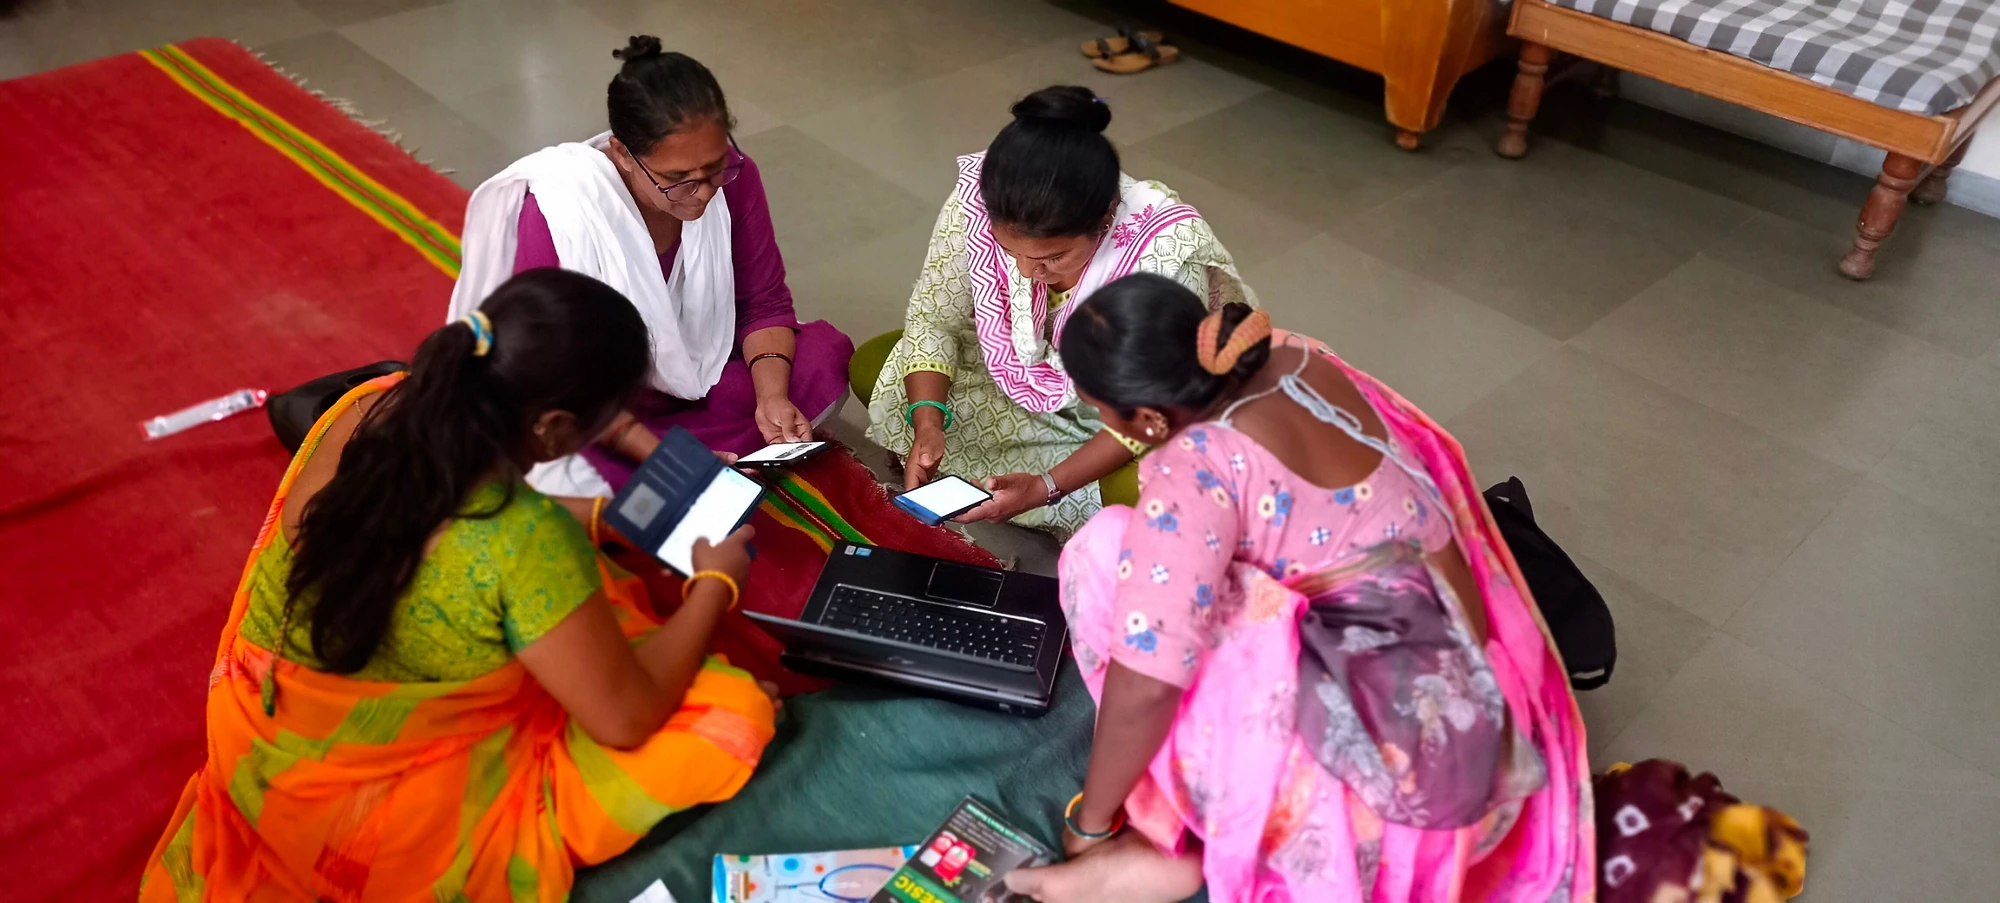 With a proper support system, the number, scale, and sustainability of women?s enterprises could increase significantly, creating up to 170 million jobs - which is more than 25 percent of the new jobs that need to be created in India until 2030.